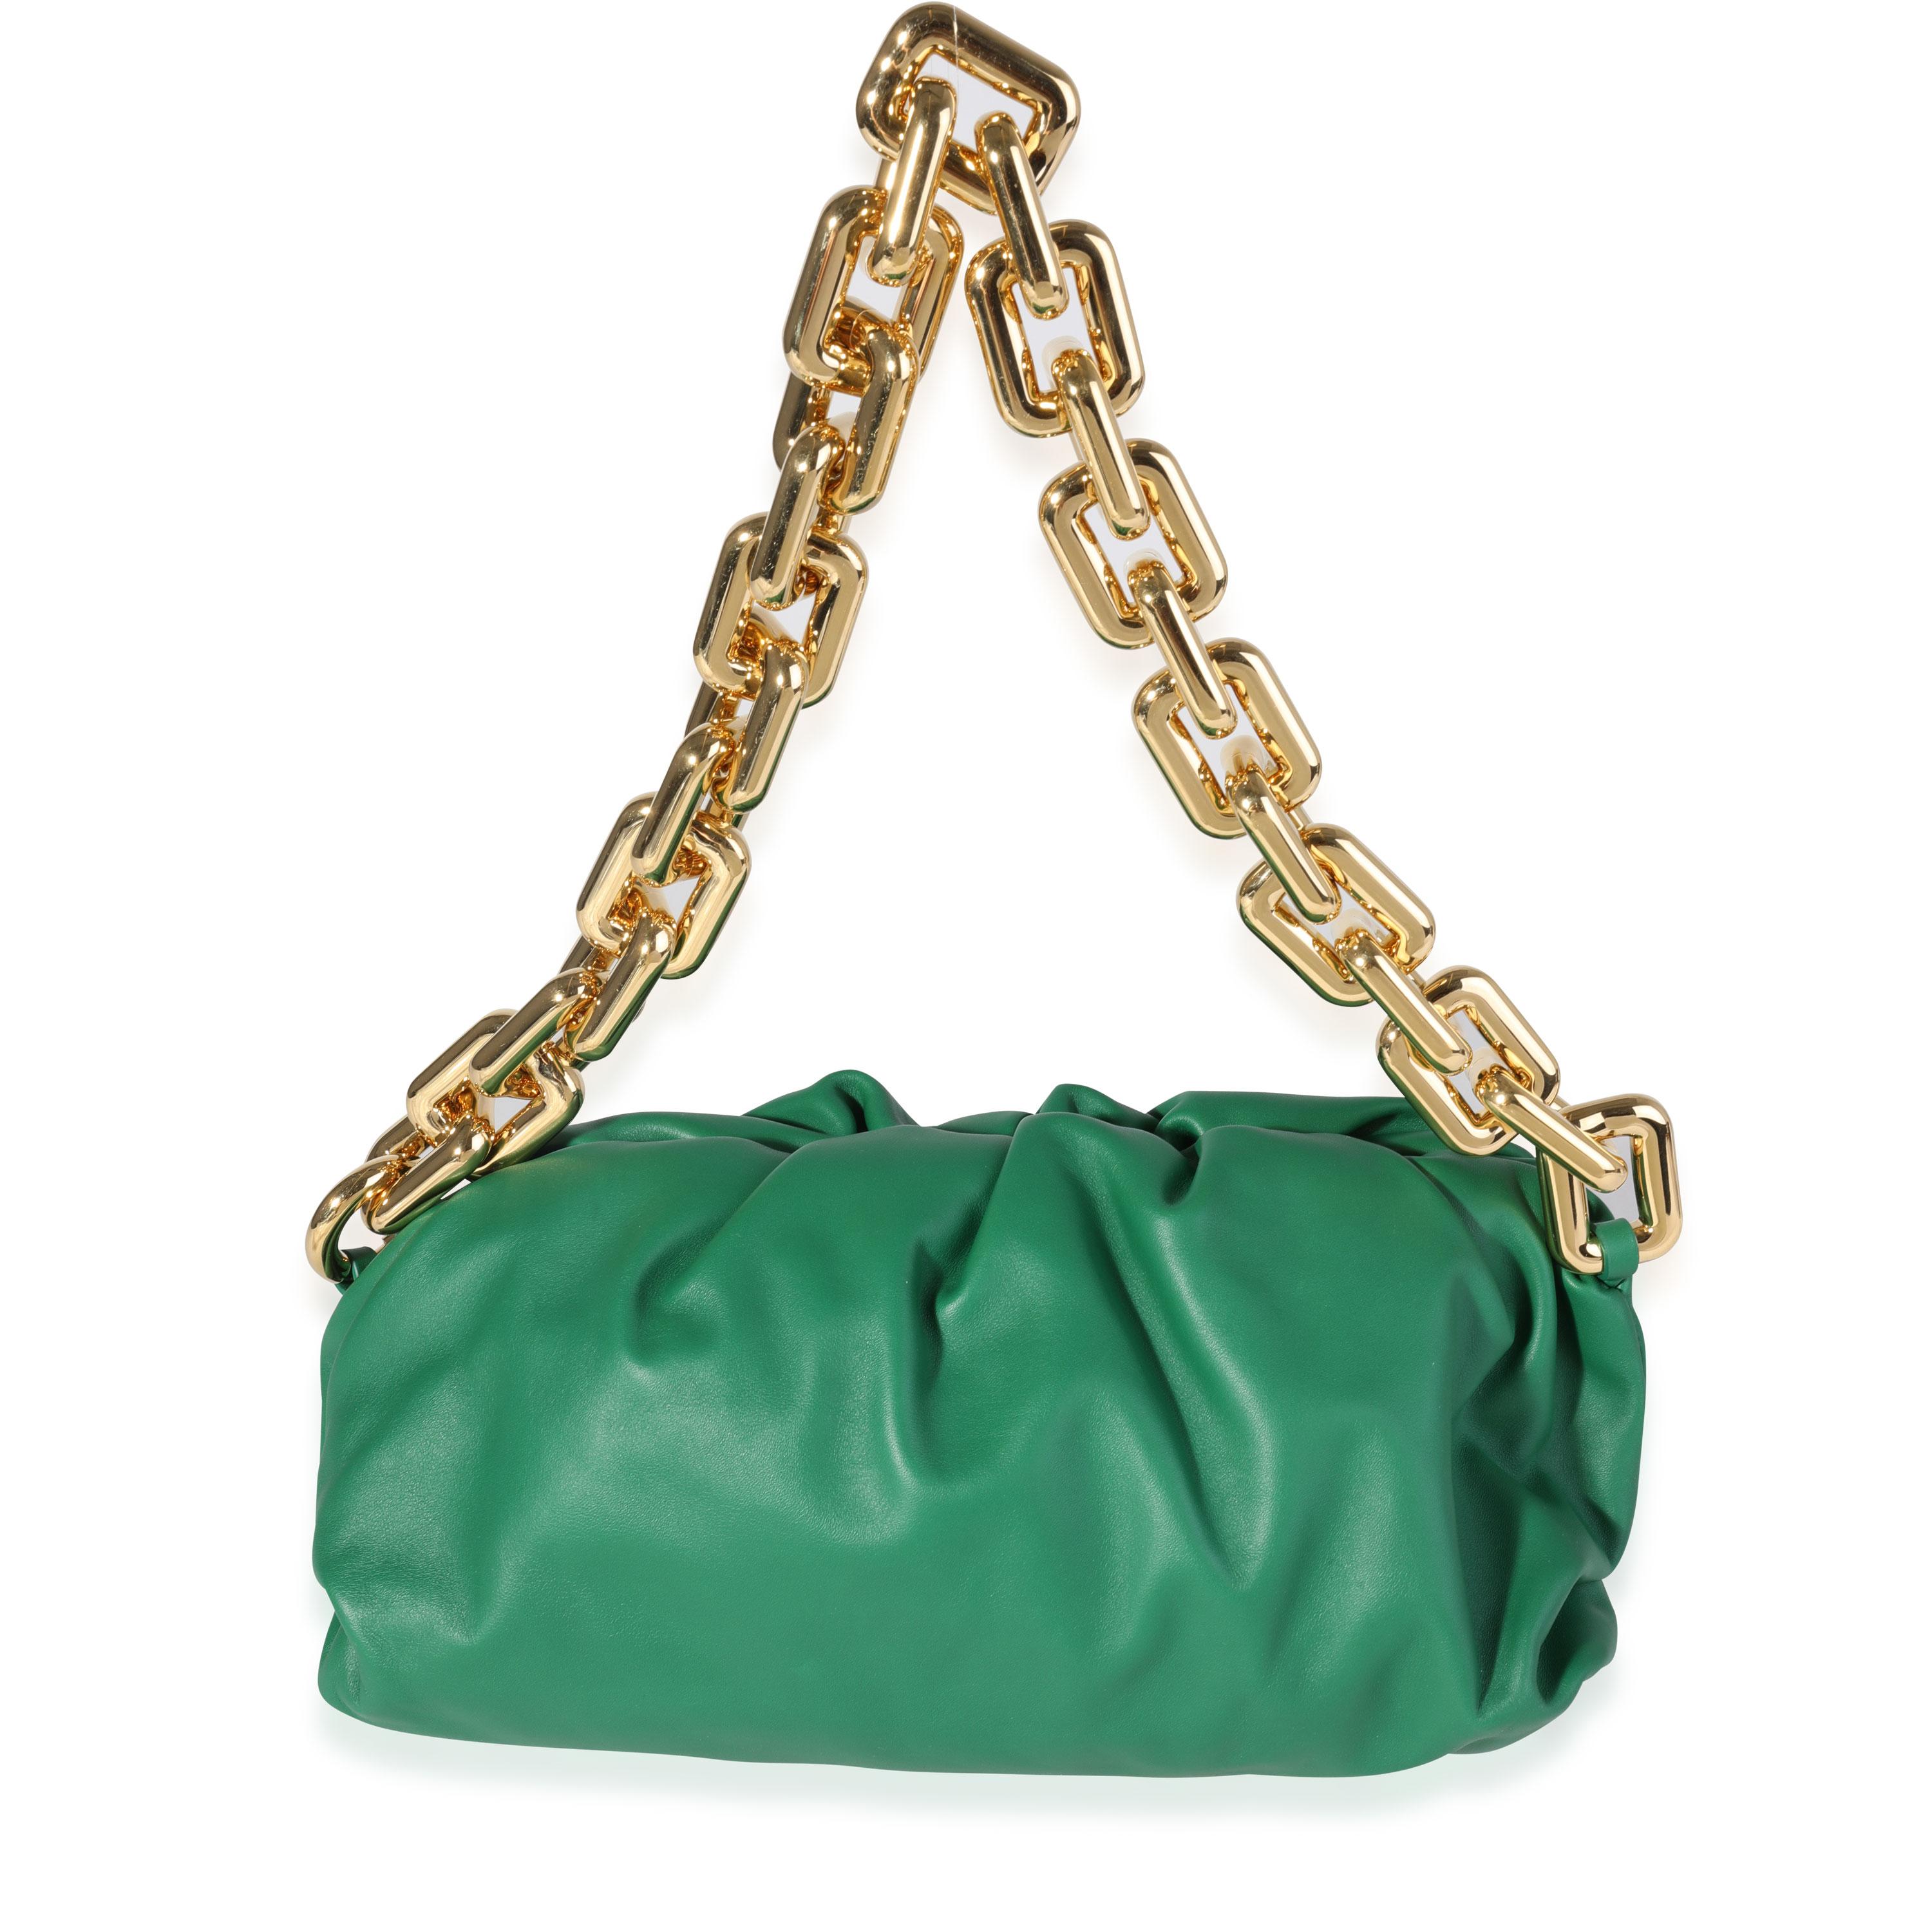 Listing Title: Bottega Veneta Racing Green Lambskin Chain Pouch
SKU: 118884
MSRP: 3800.00
Condition: Pre-owned (3000)
Handbag Condition: Never Worn
Brand: Bottega Veneta
Model: Chain Pouch
Origin Country: Italy
Handbag Silhouette: Clutch;Evening